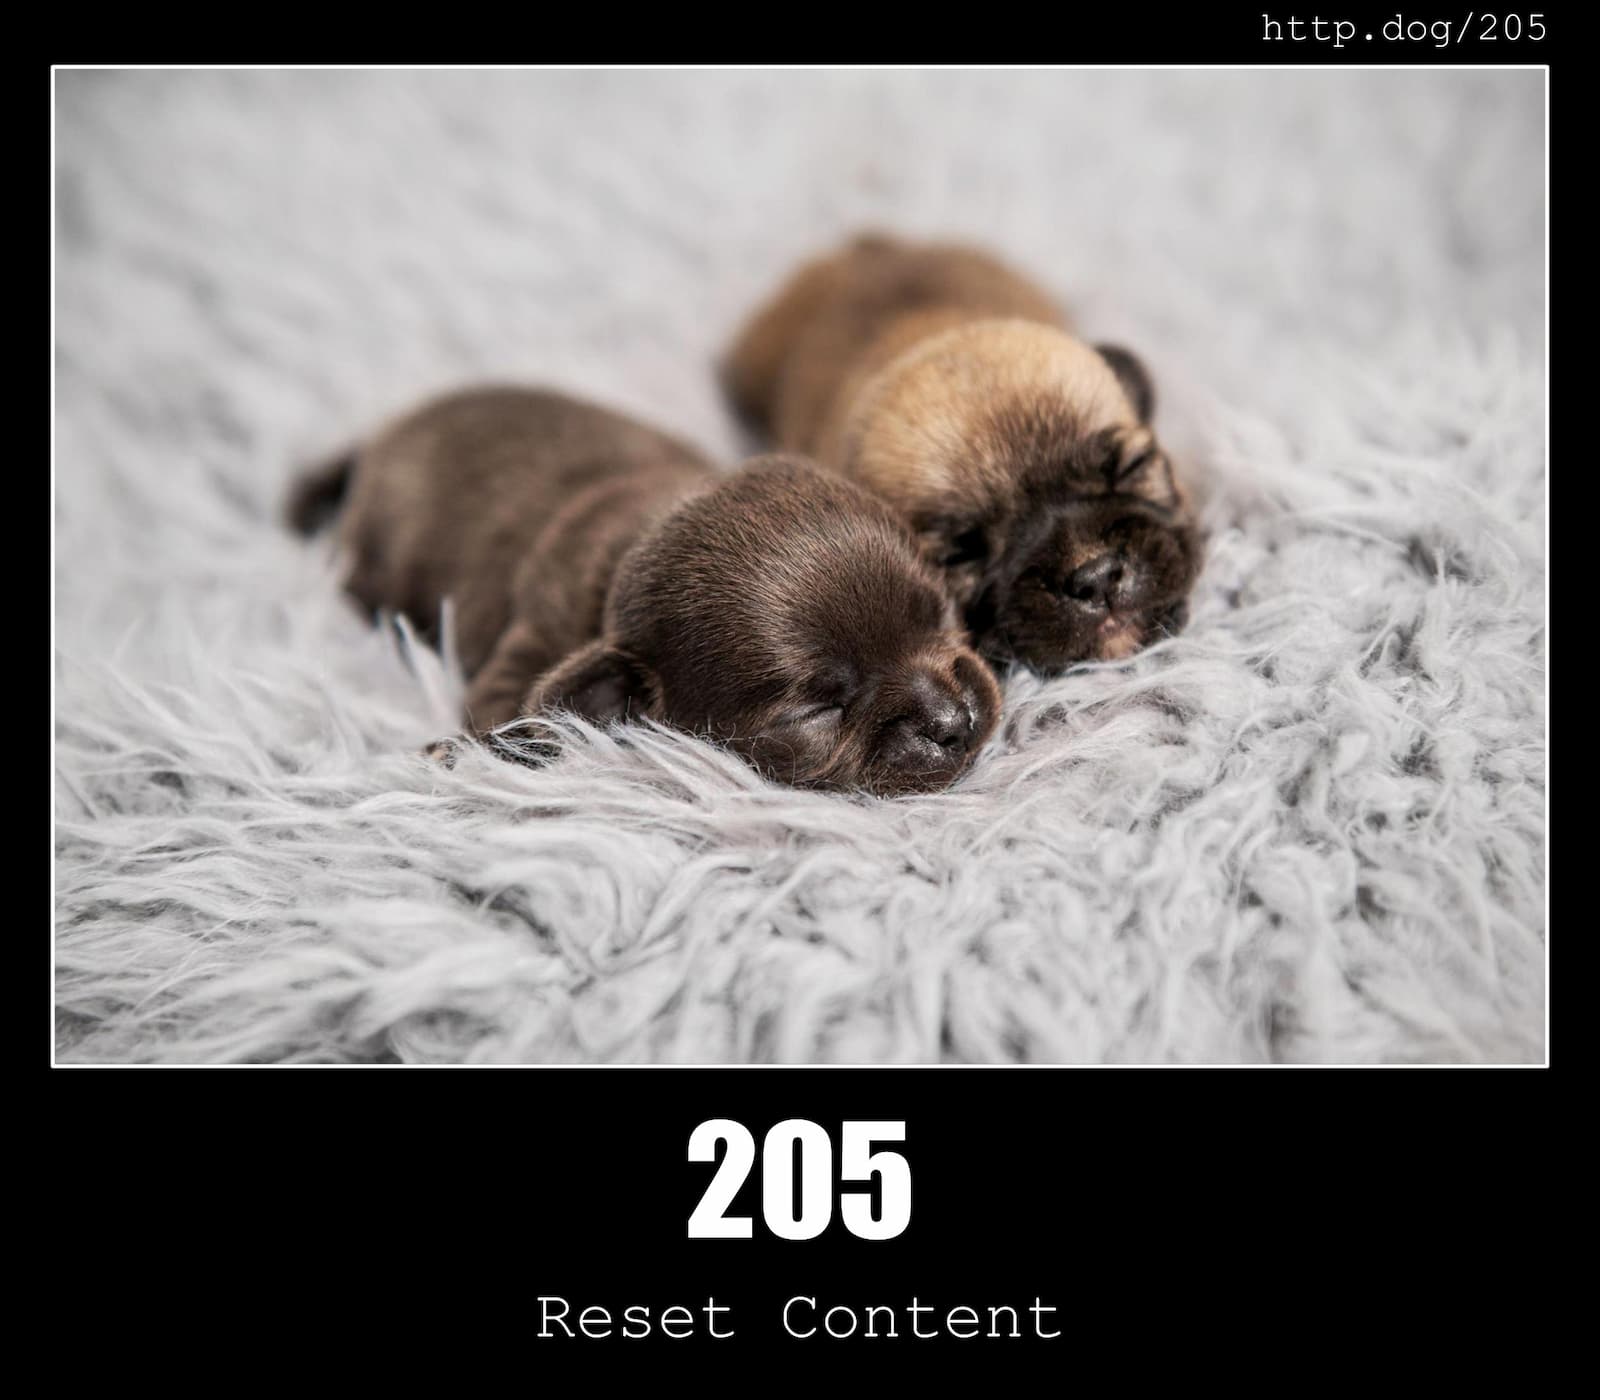 HTTP Status Code 205 Reset Content & Dogs